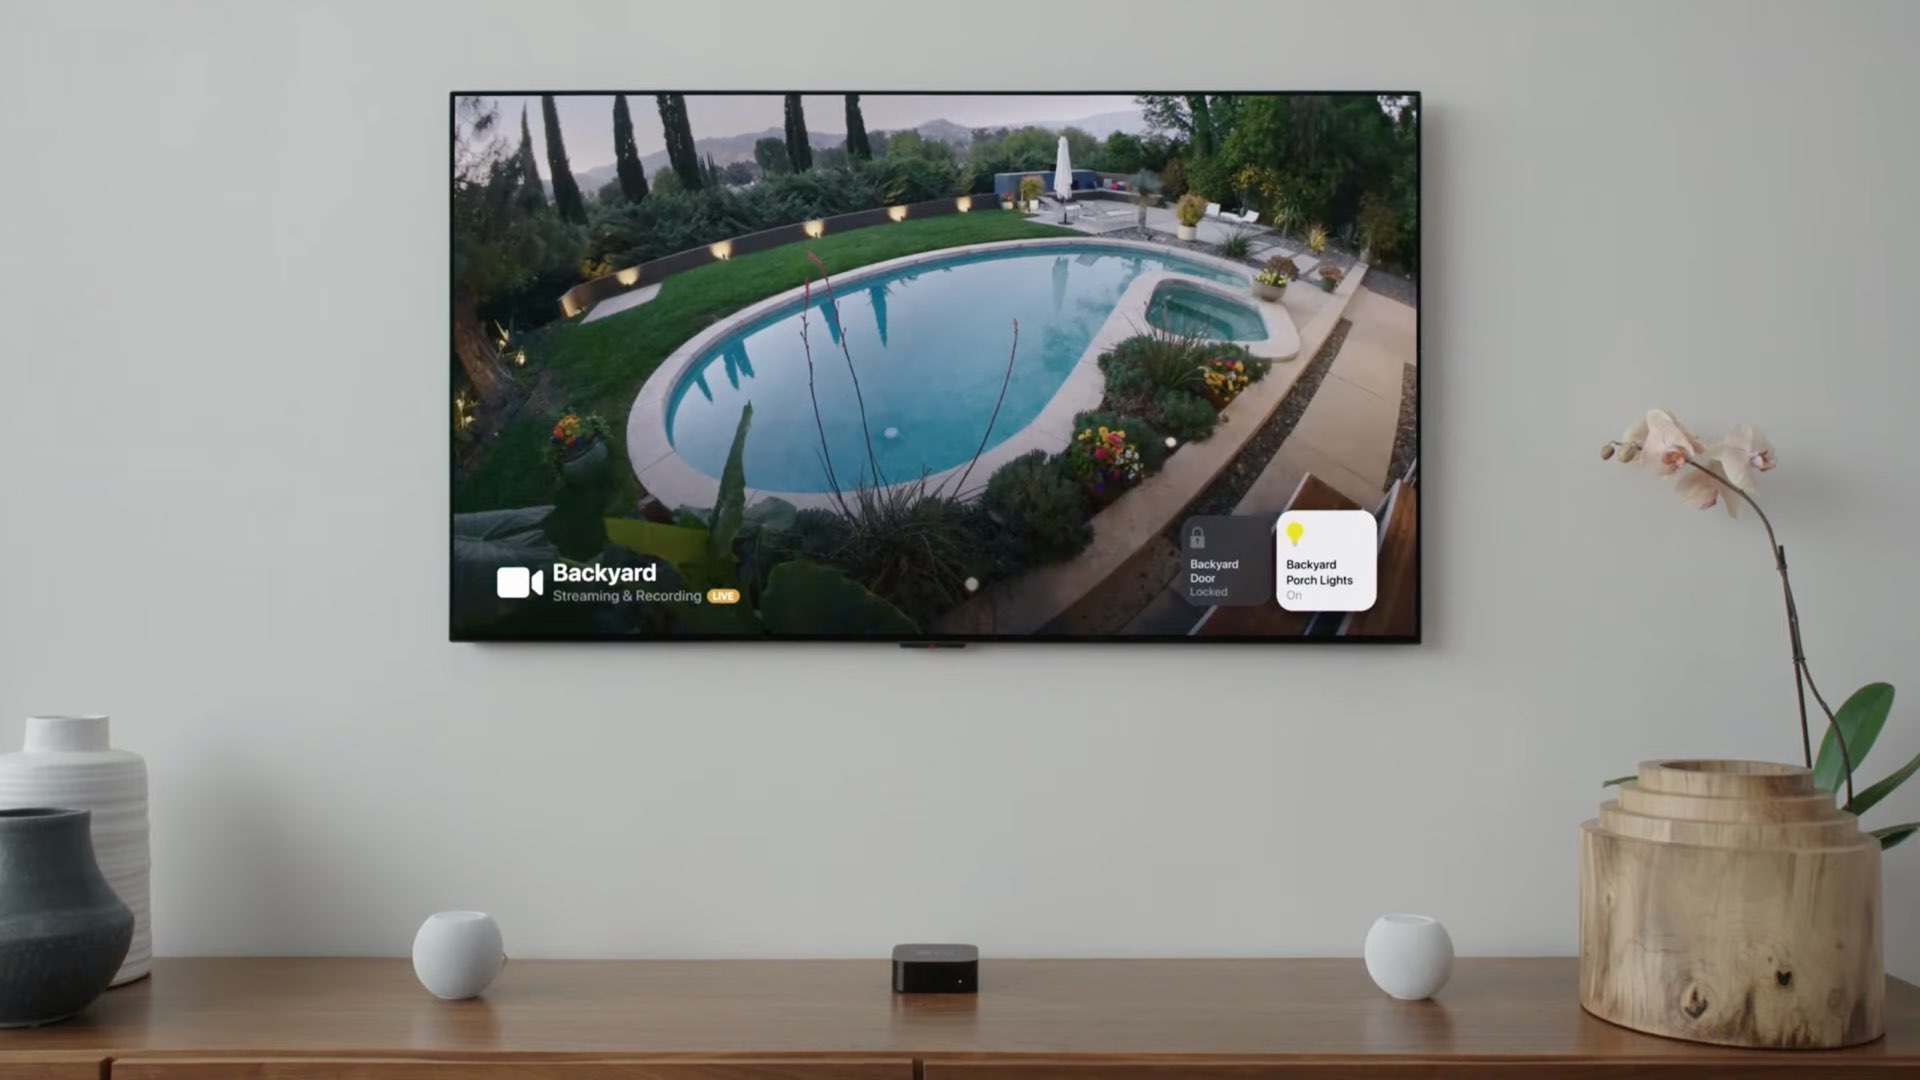 An image showing a HomeKit security camera feed displayed on Apple TV with tvOS 15, with smart lighting controls visible in screen corners